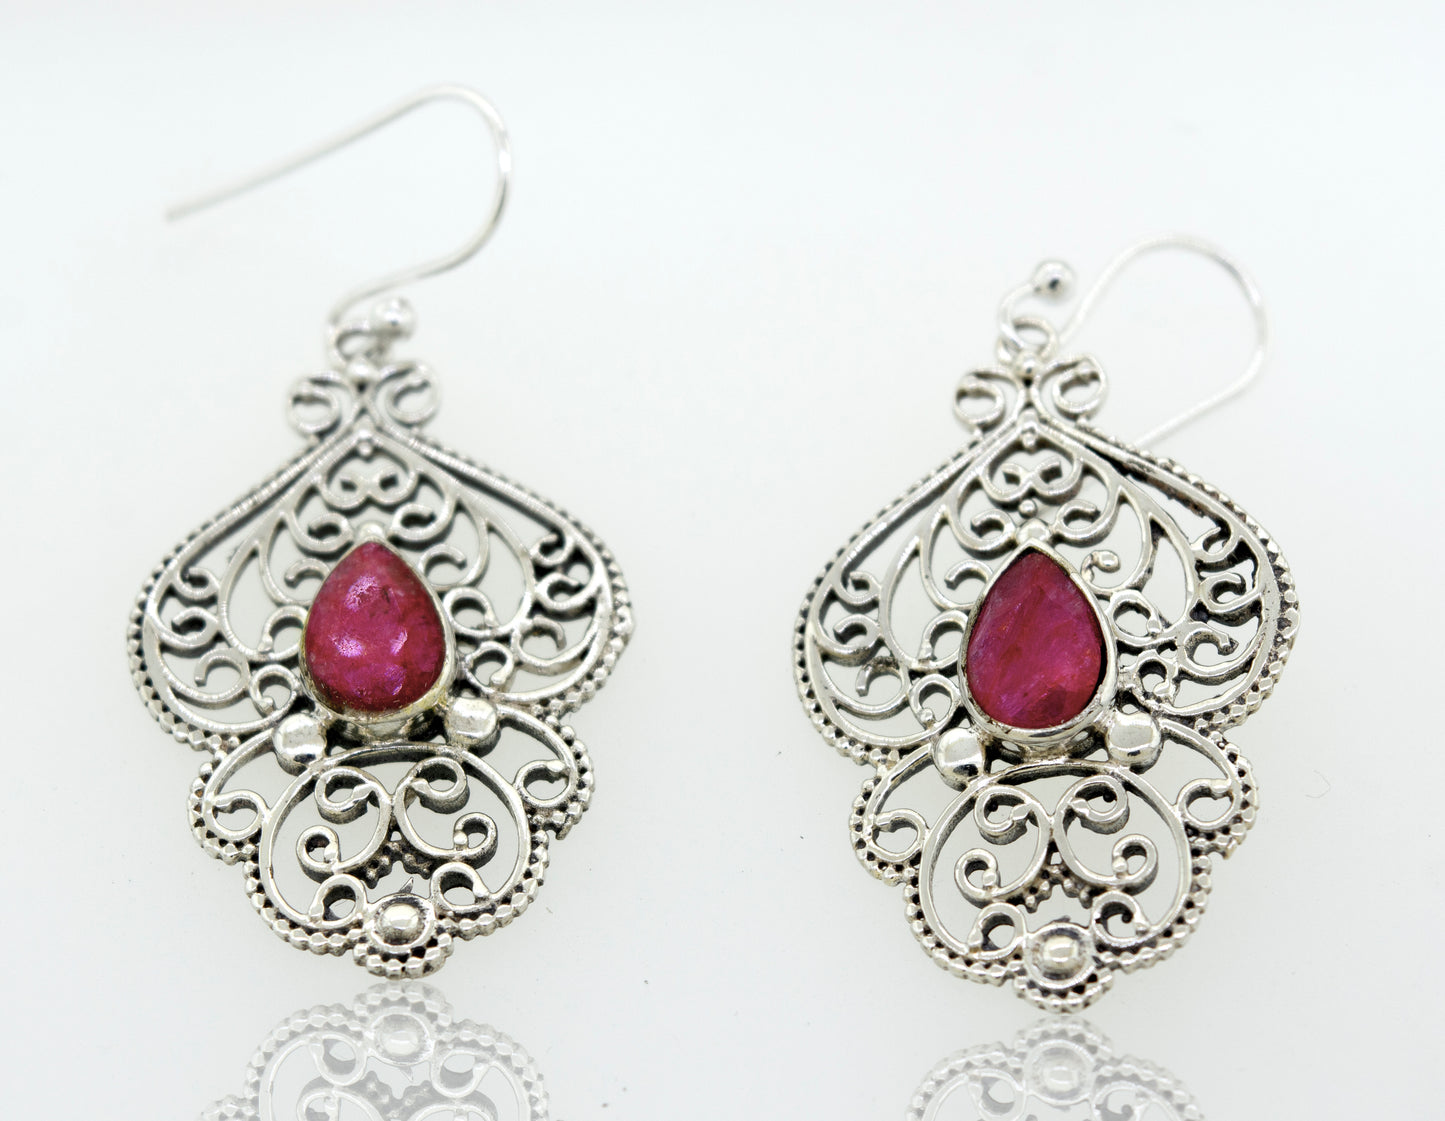 A pair of Super Silver Teardrop Ruby Earrings with a vibrant teardrop-shaped ruby stone set in silver.